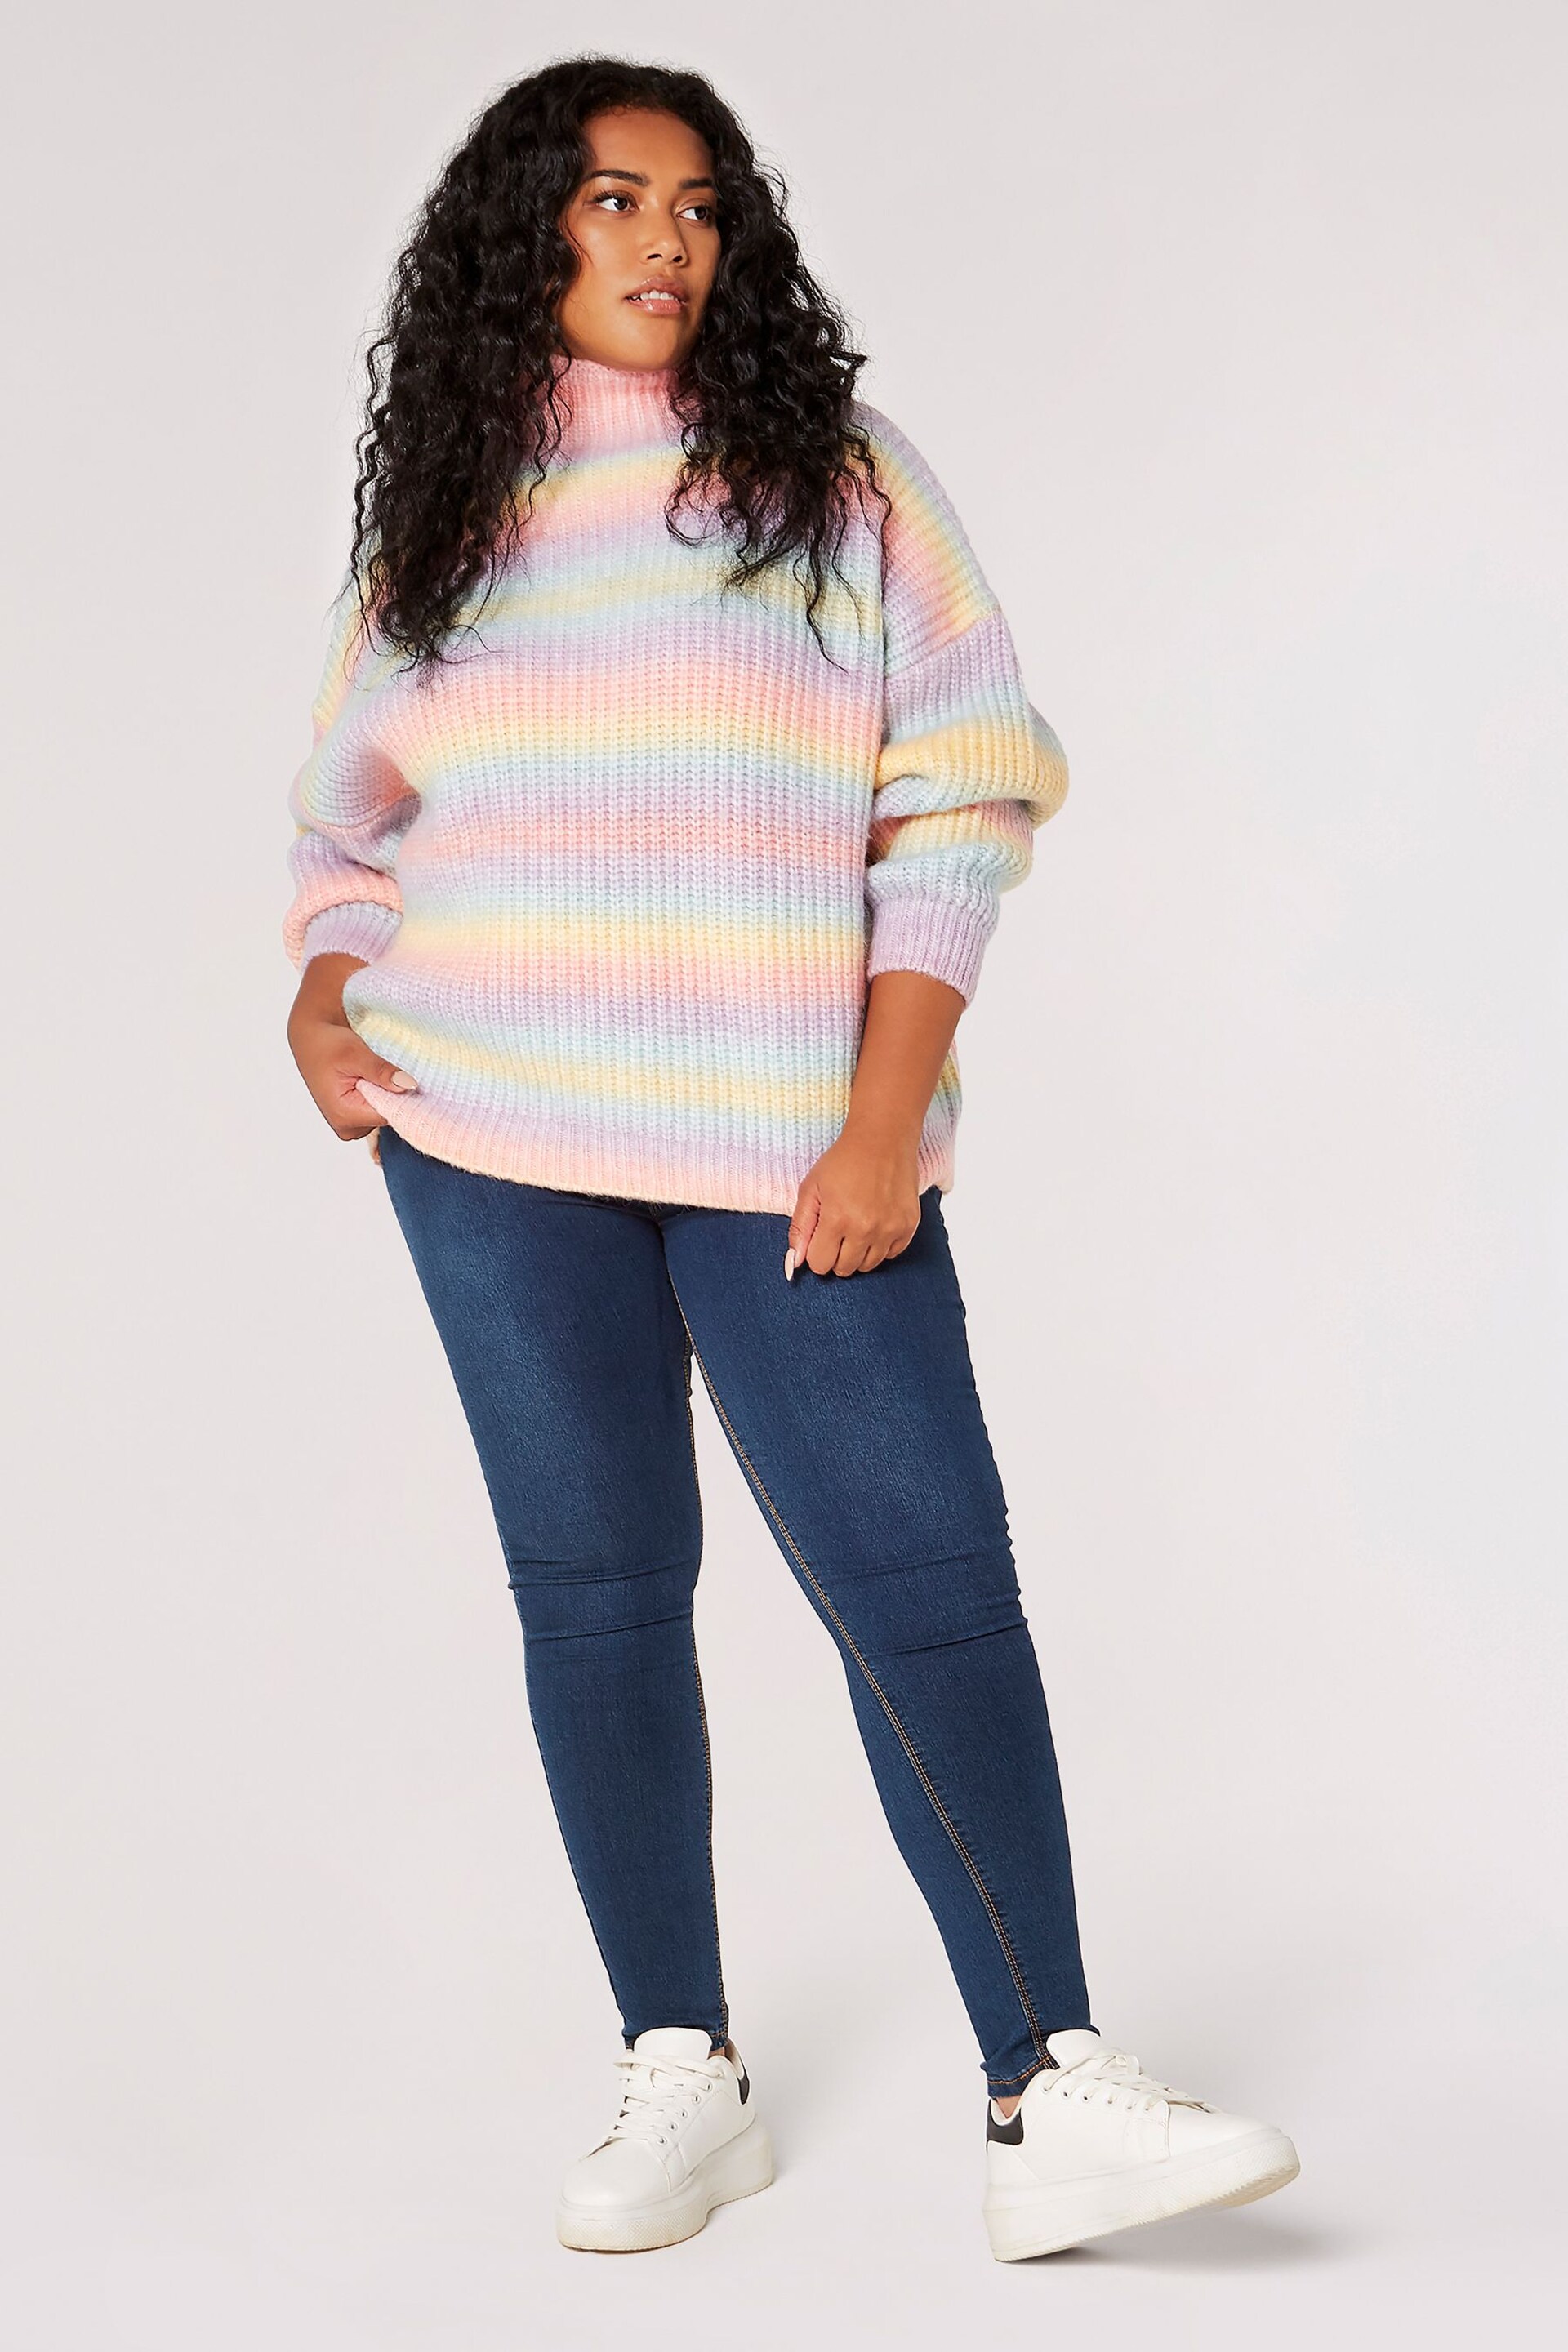 Apricot Pink Multi Rainbow Mock Neck Oversized Ombre Jumper - Image 3 of 4